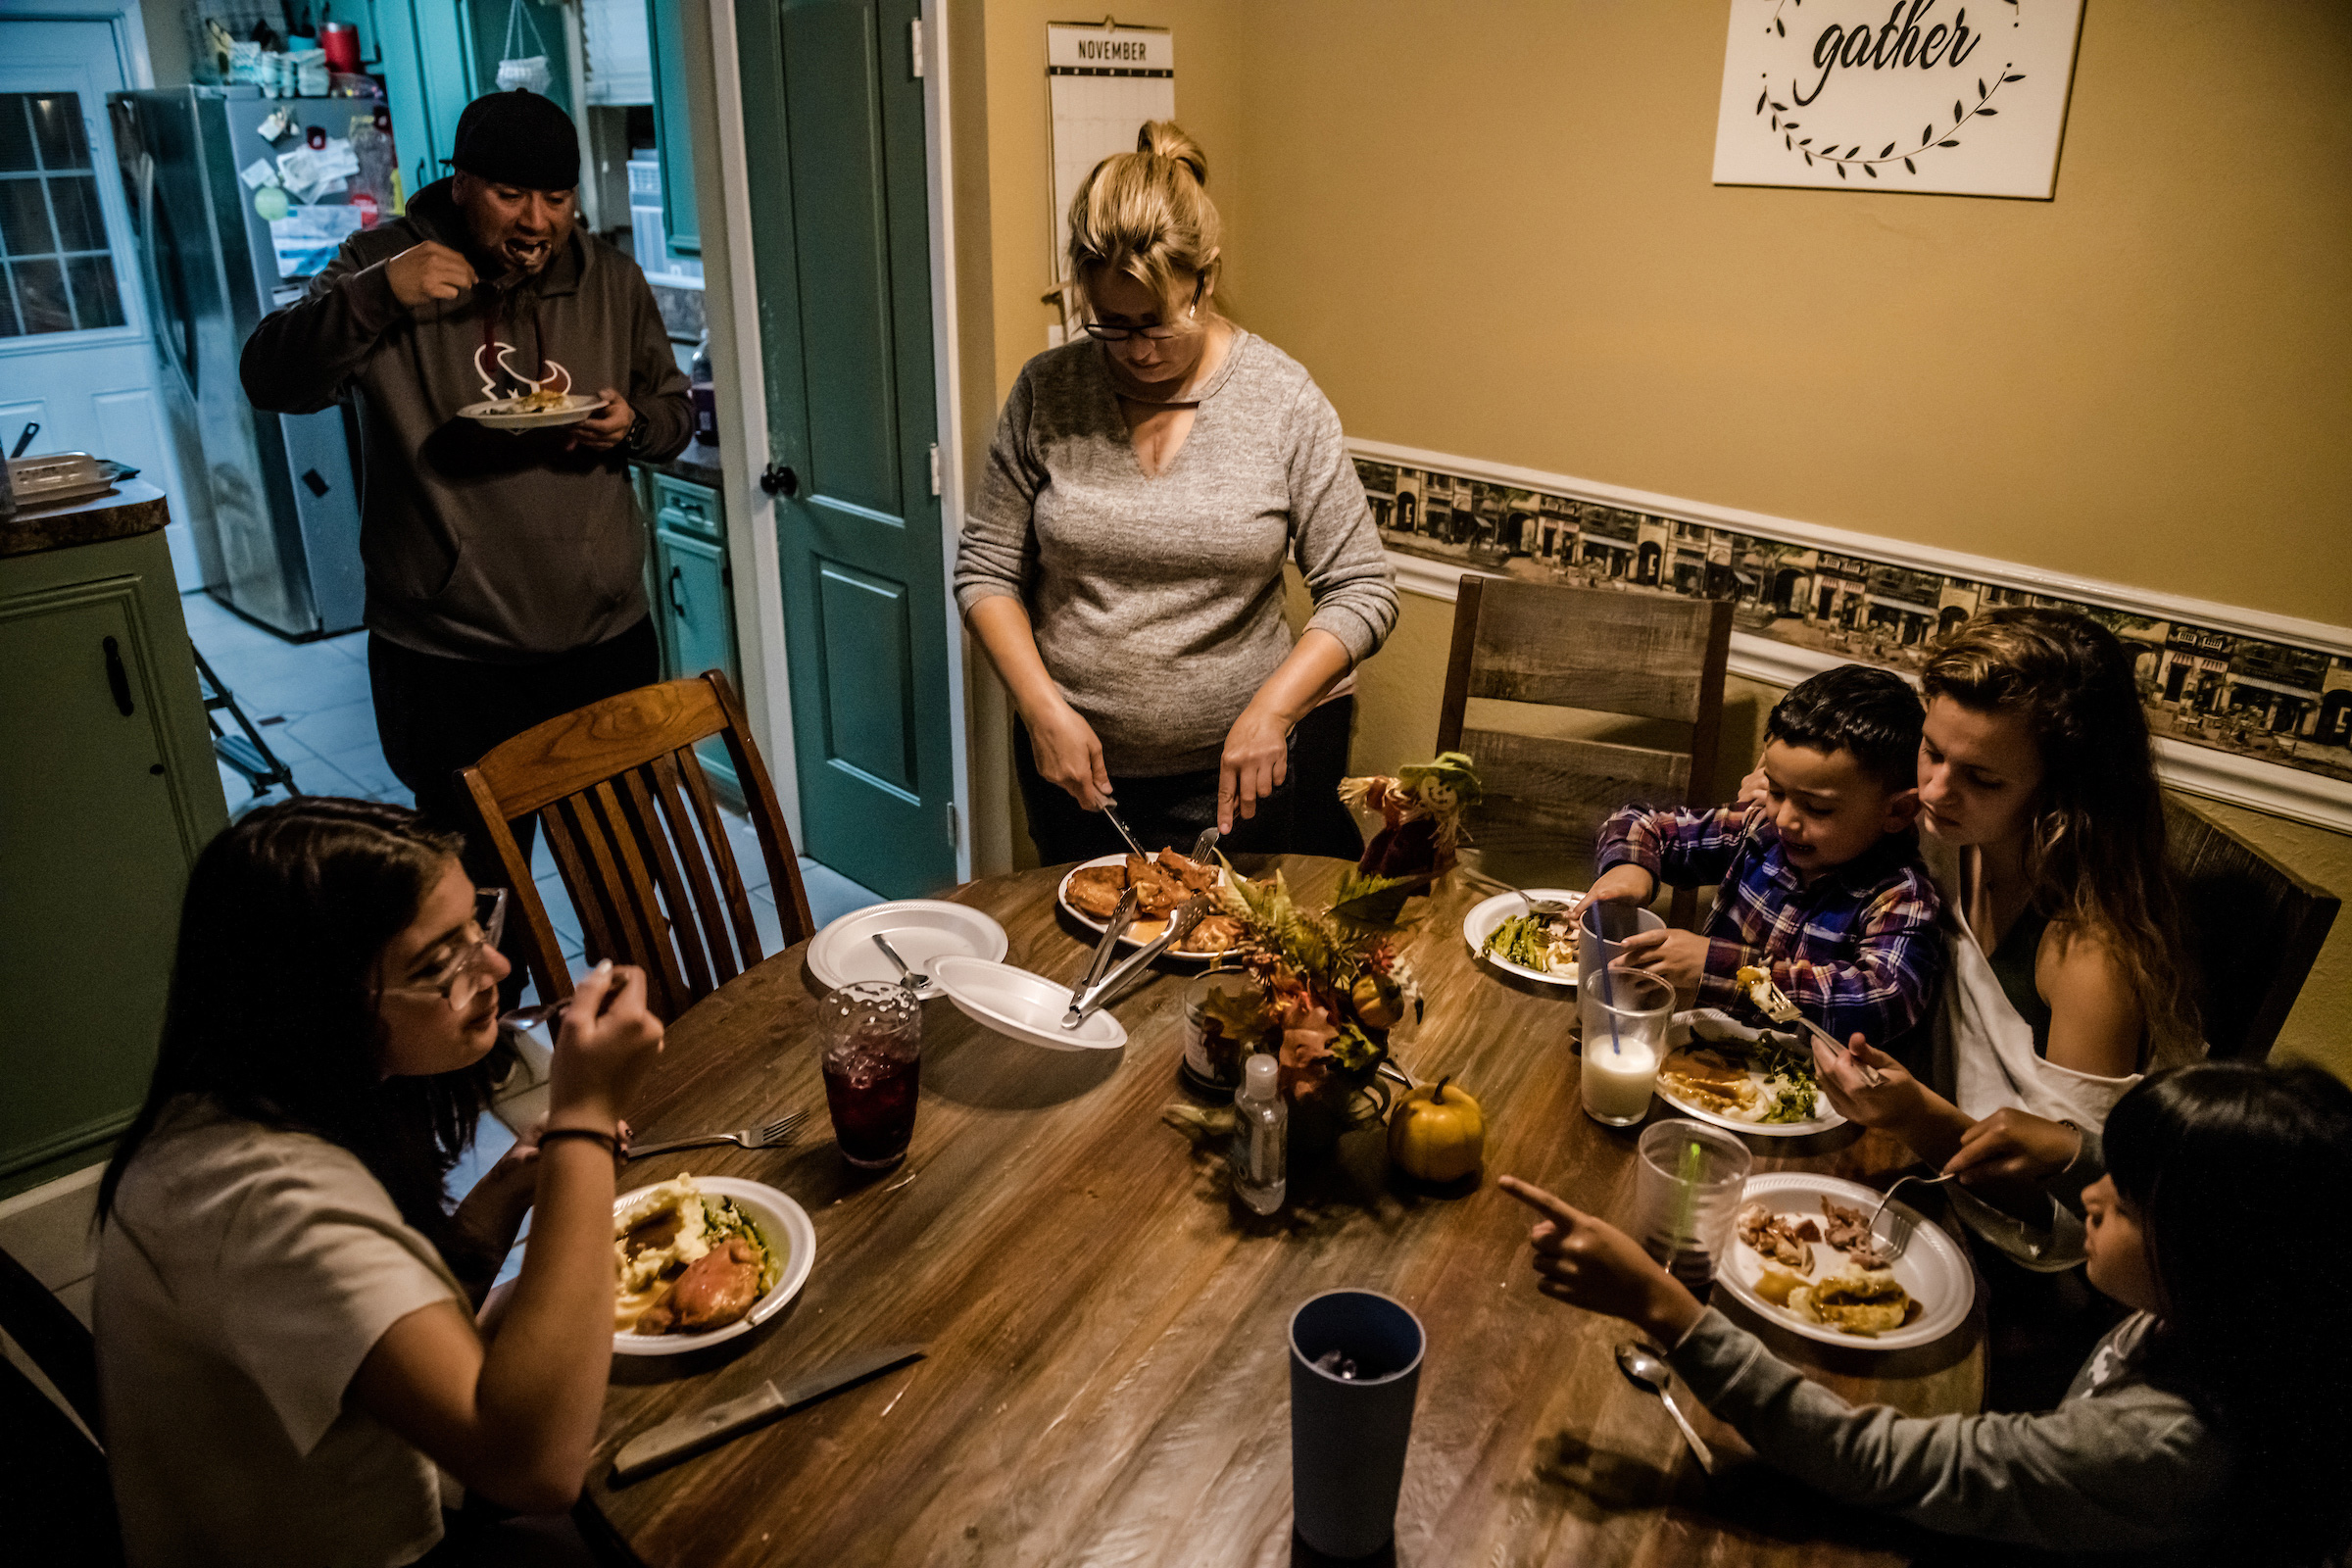 Jessica Higginbotham, center, prepares dinner with her children and husband on Nov. 17. “When it got really bad with the money," says Higginbotham, 40, "it was either pay the light bill or have food on the table." (Meridith Kohut for TIME)